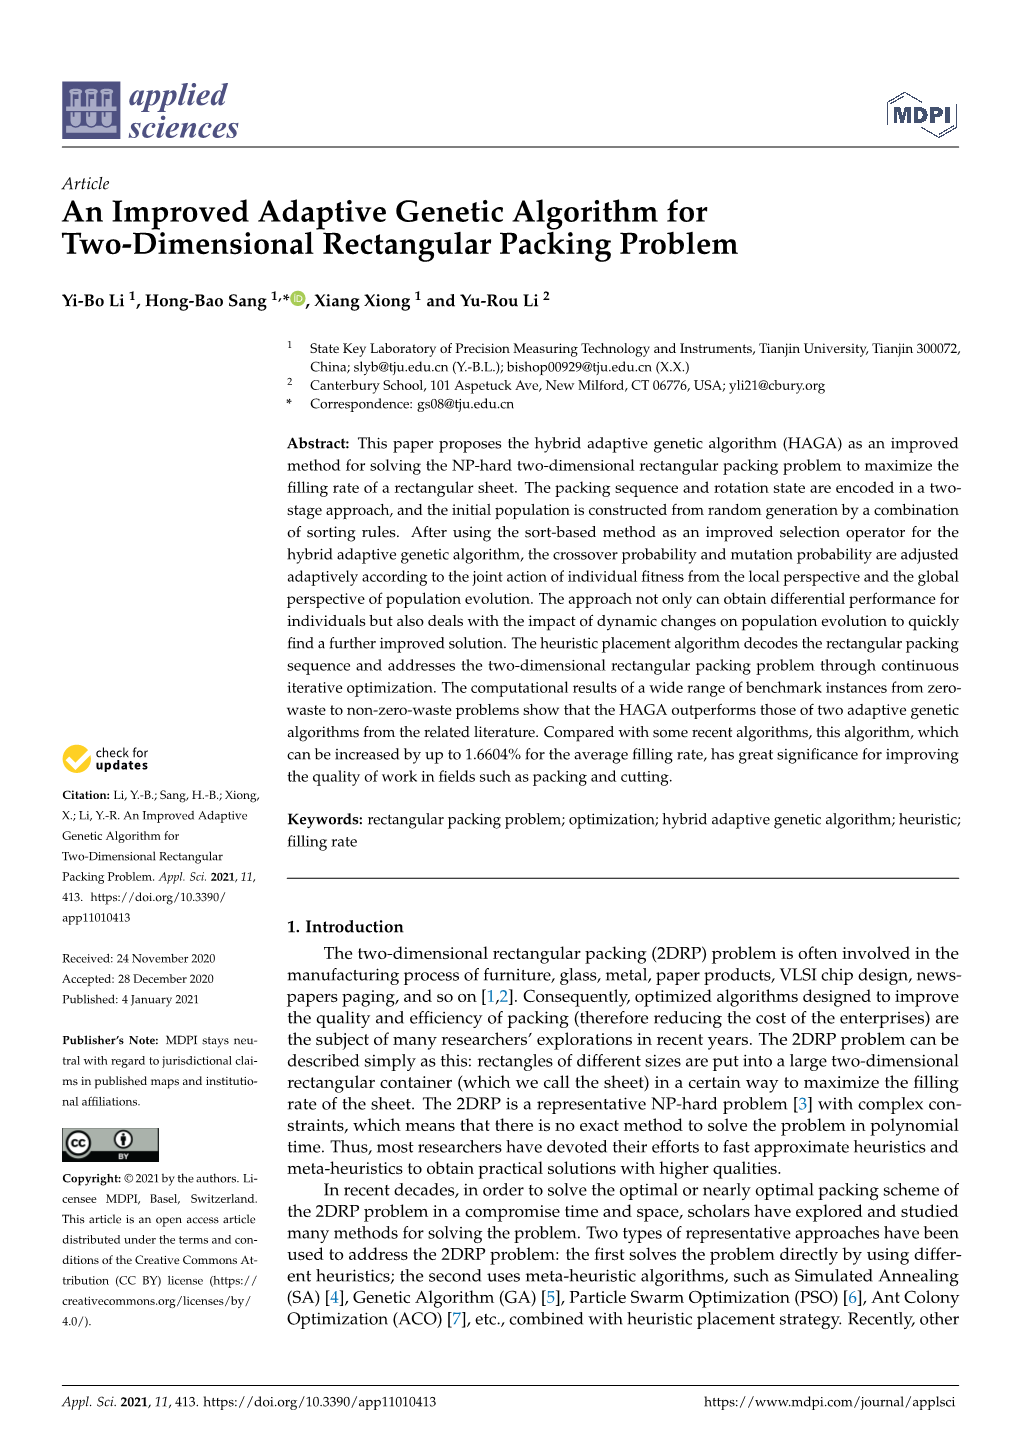 An Improved Adaptive Genetic Algorithm for Two-Dimensional Rectangular Packing Problem